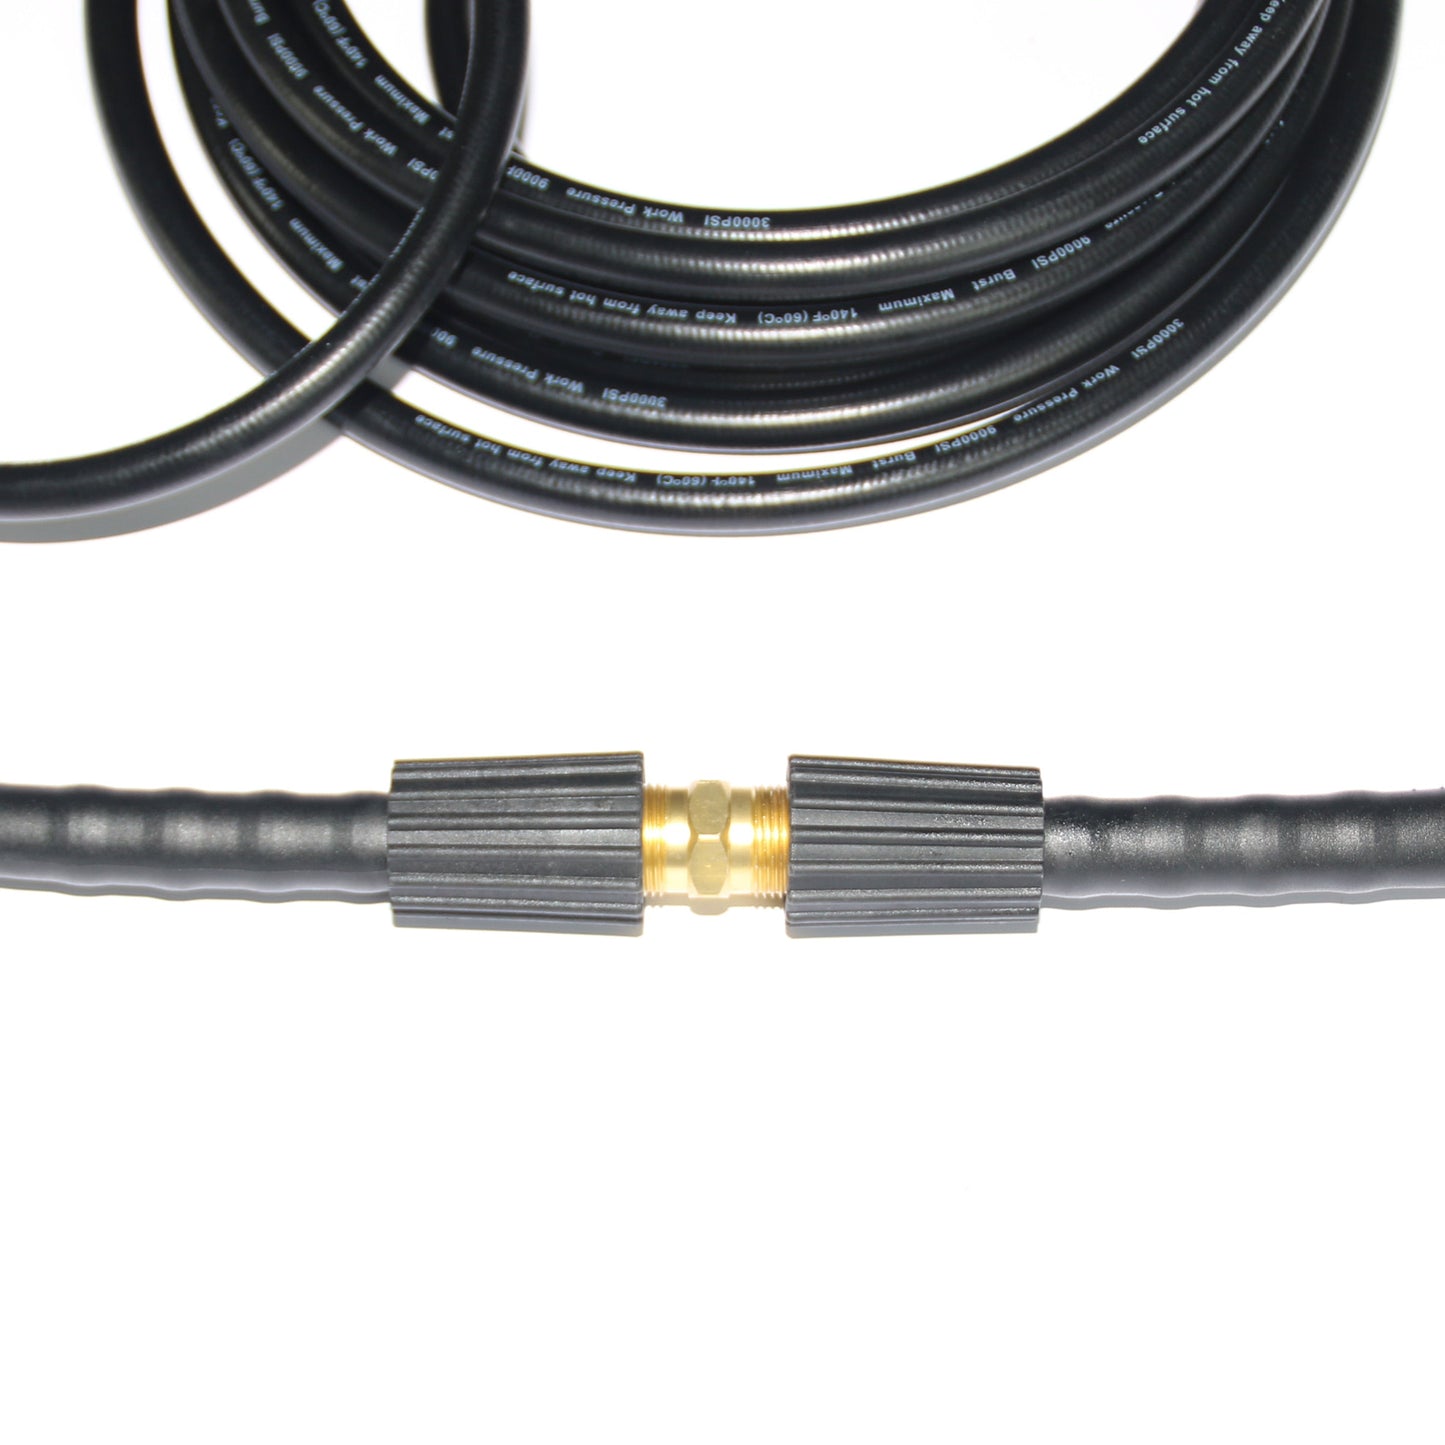 XZT 20MPa 3000PSI Anti-Kink High Pressure Washer Hose,Power Washer Extension Replacement Hose for most brand pressure washer  Home & Garden > Lawn & Garden > Outdoor Power Equipment Accessories > Pressure Washer Accessories 69.99 EZYSELLA SHOP